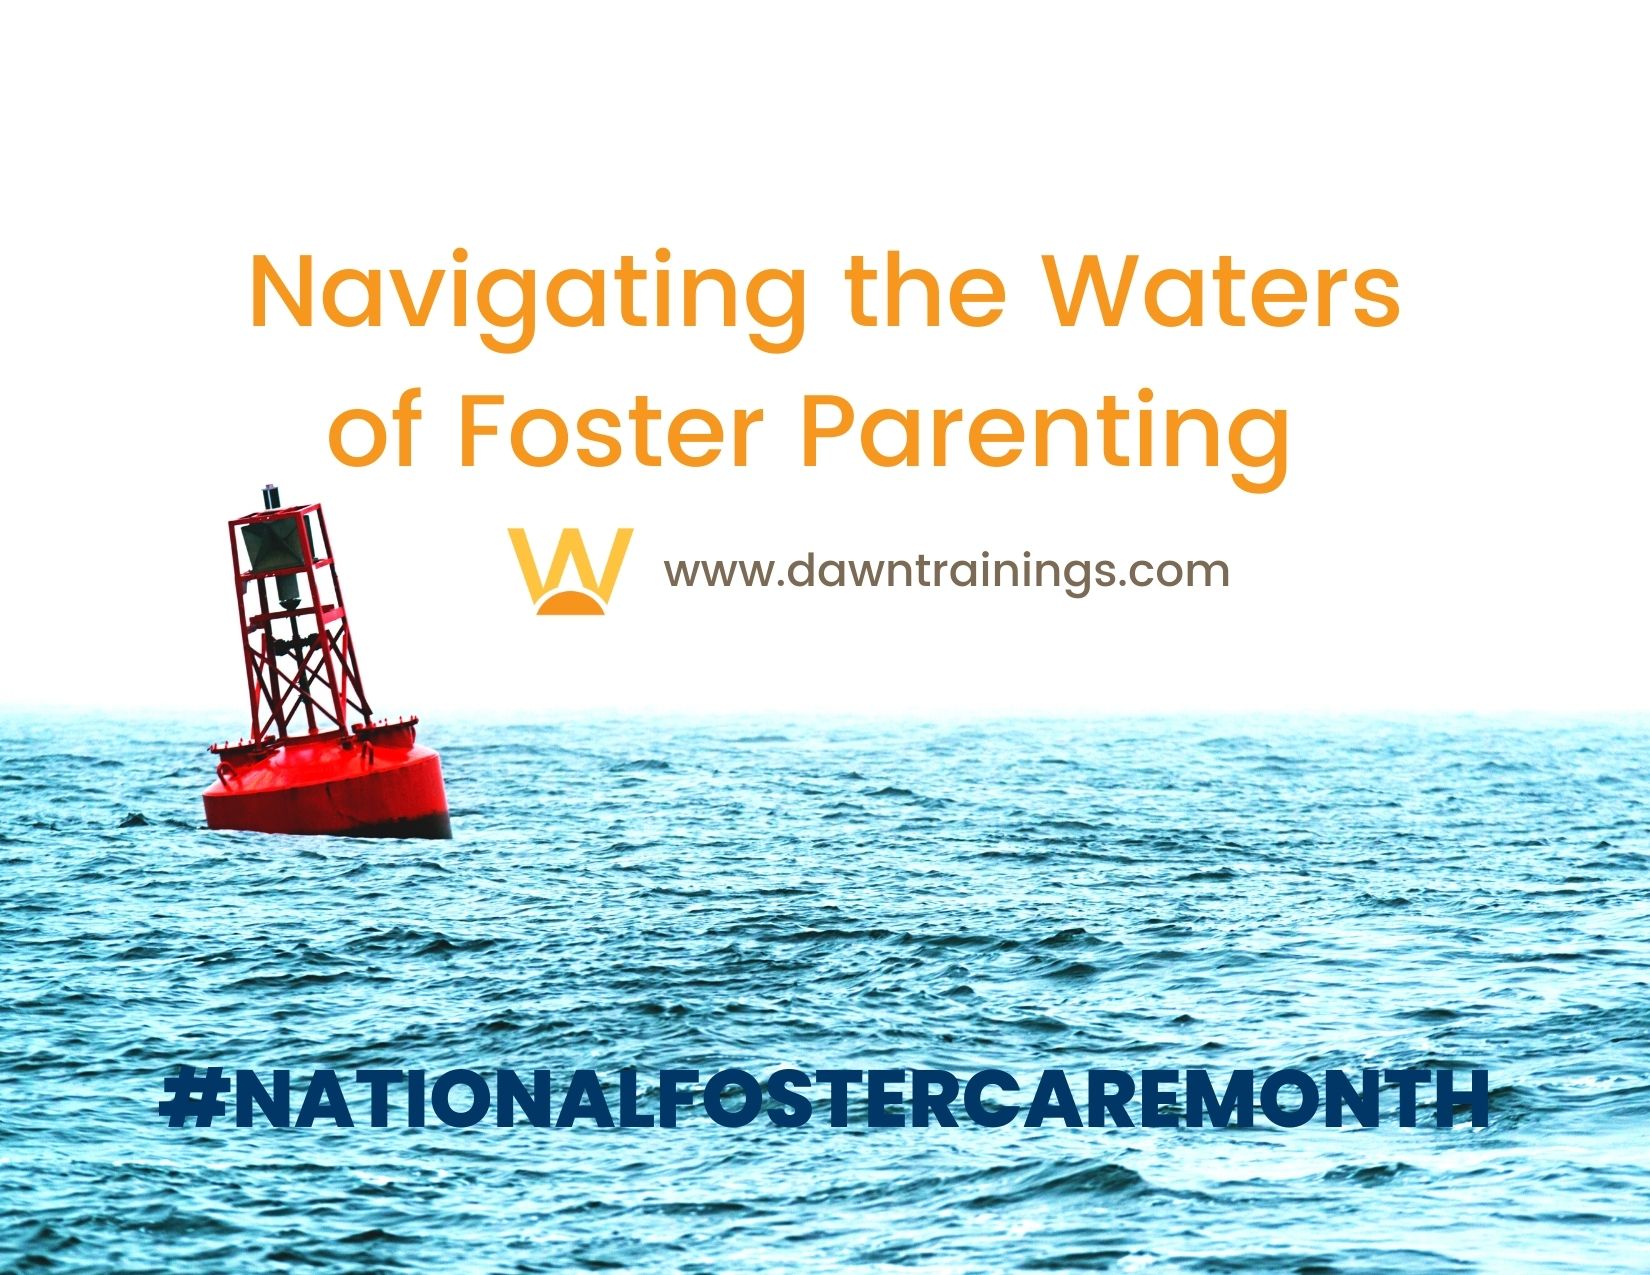 Navigating the Waters of Foster Parenting